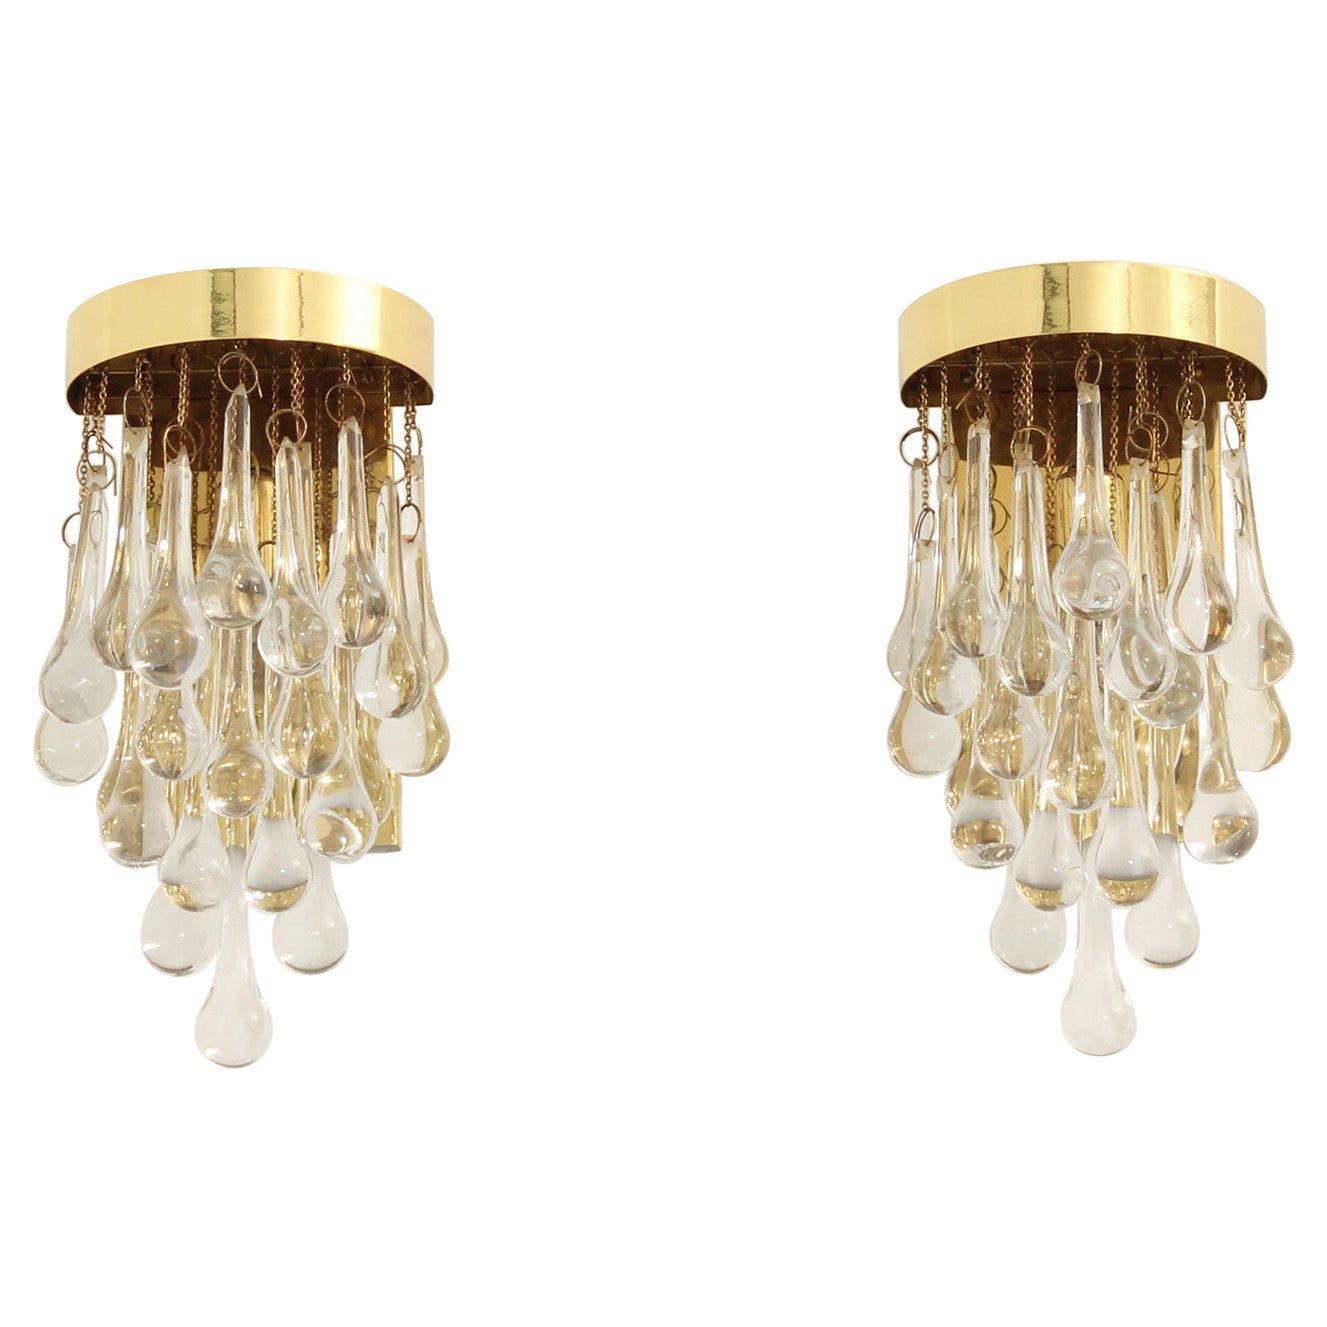 Pair of Brass and Glass Teardrop Sconces by Lumica, Spain, 1970's For Sale